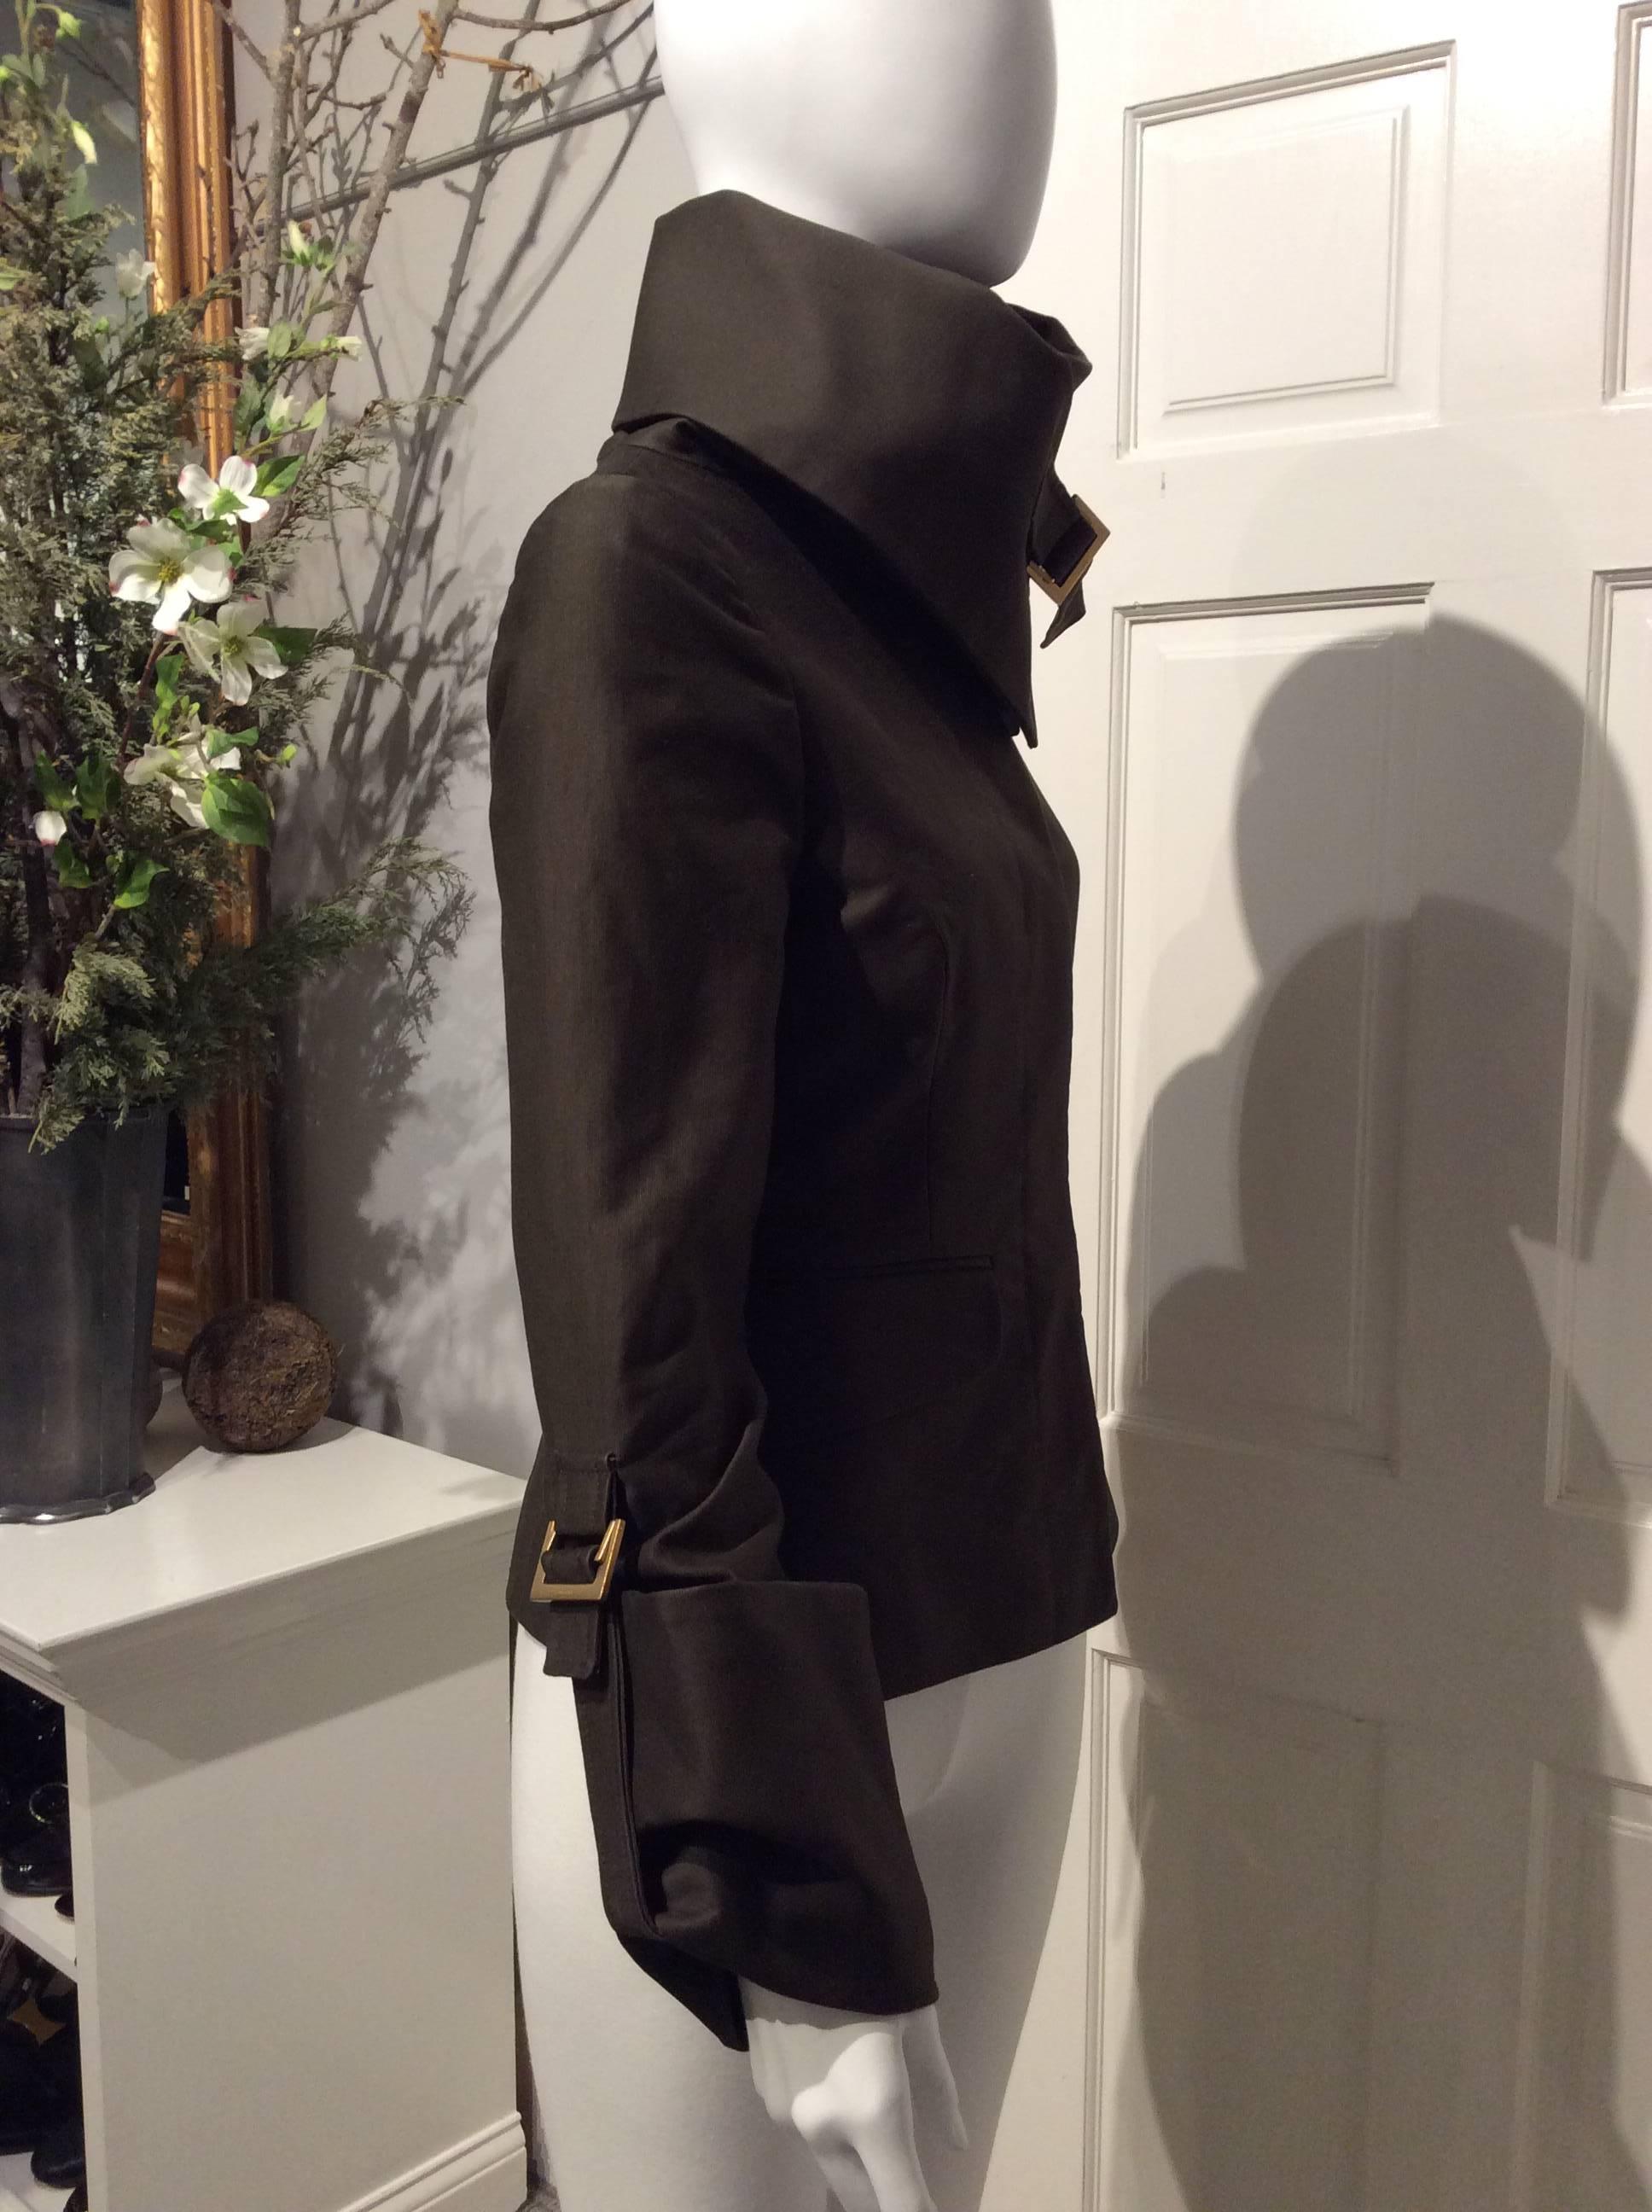 Gucci hip length dark brown, fitted, military inspired fjacket with fold over high collar and cuffs. The collar and cuffs are each kept in place by a single brushed gold buckle. The jacket closes with four hidden buttons and has two flap front